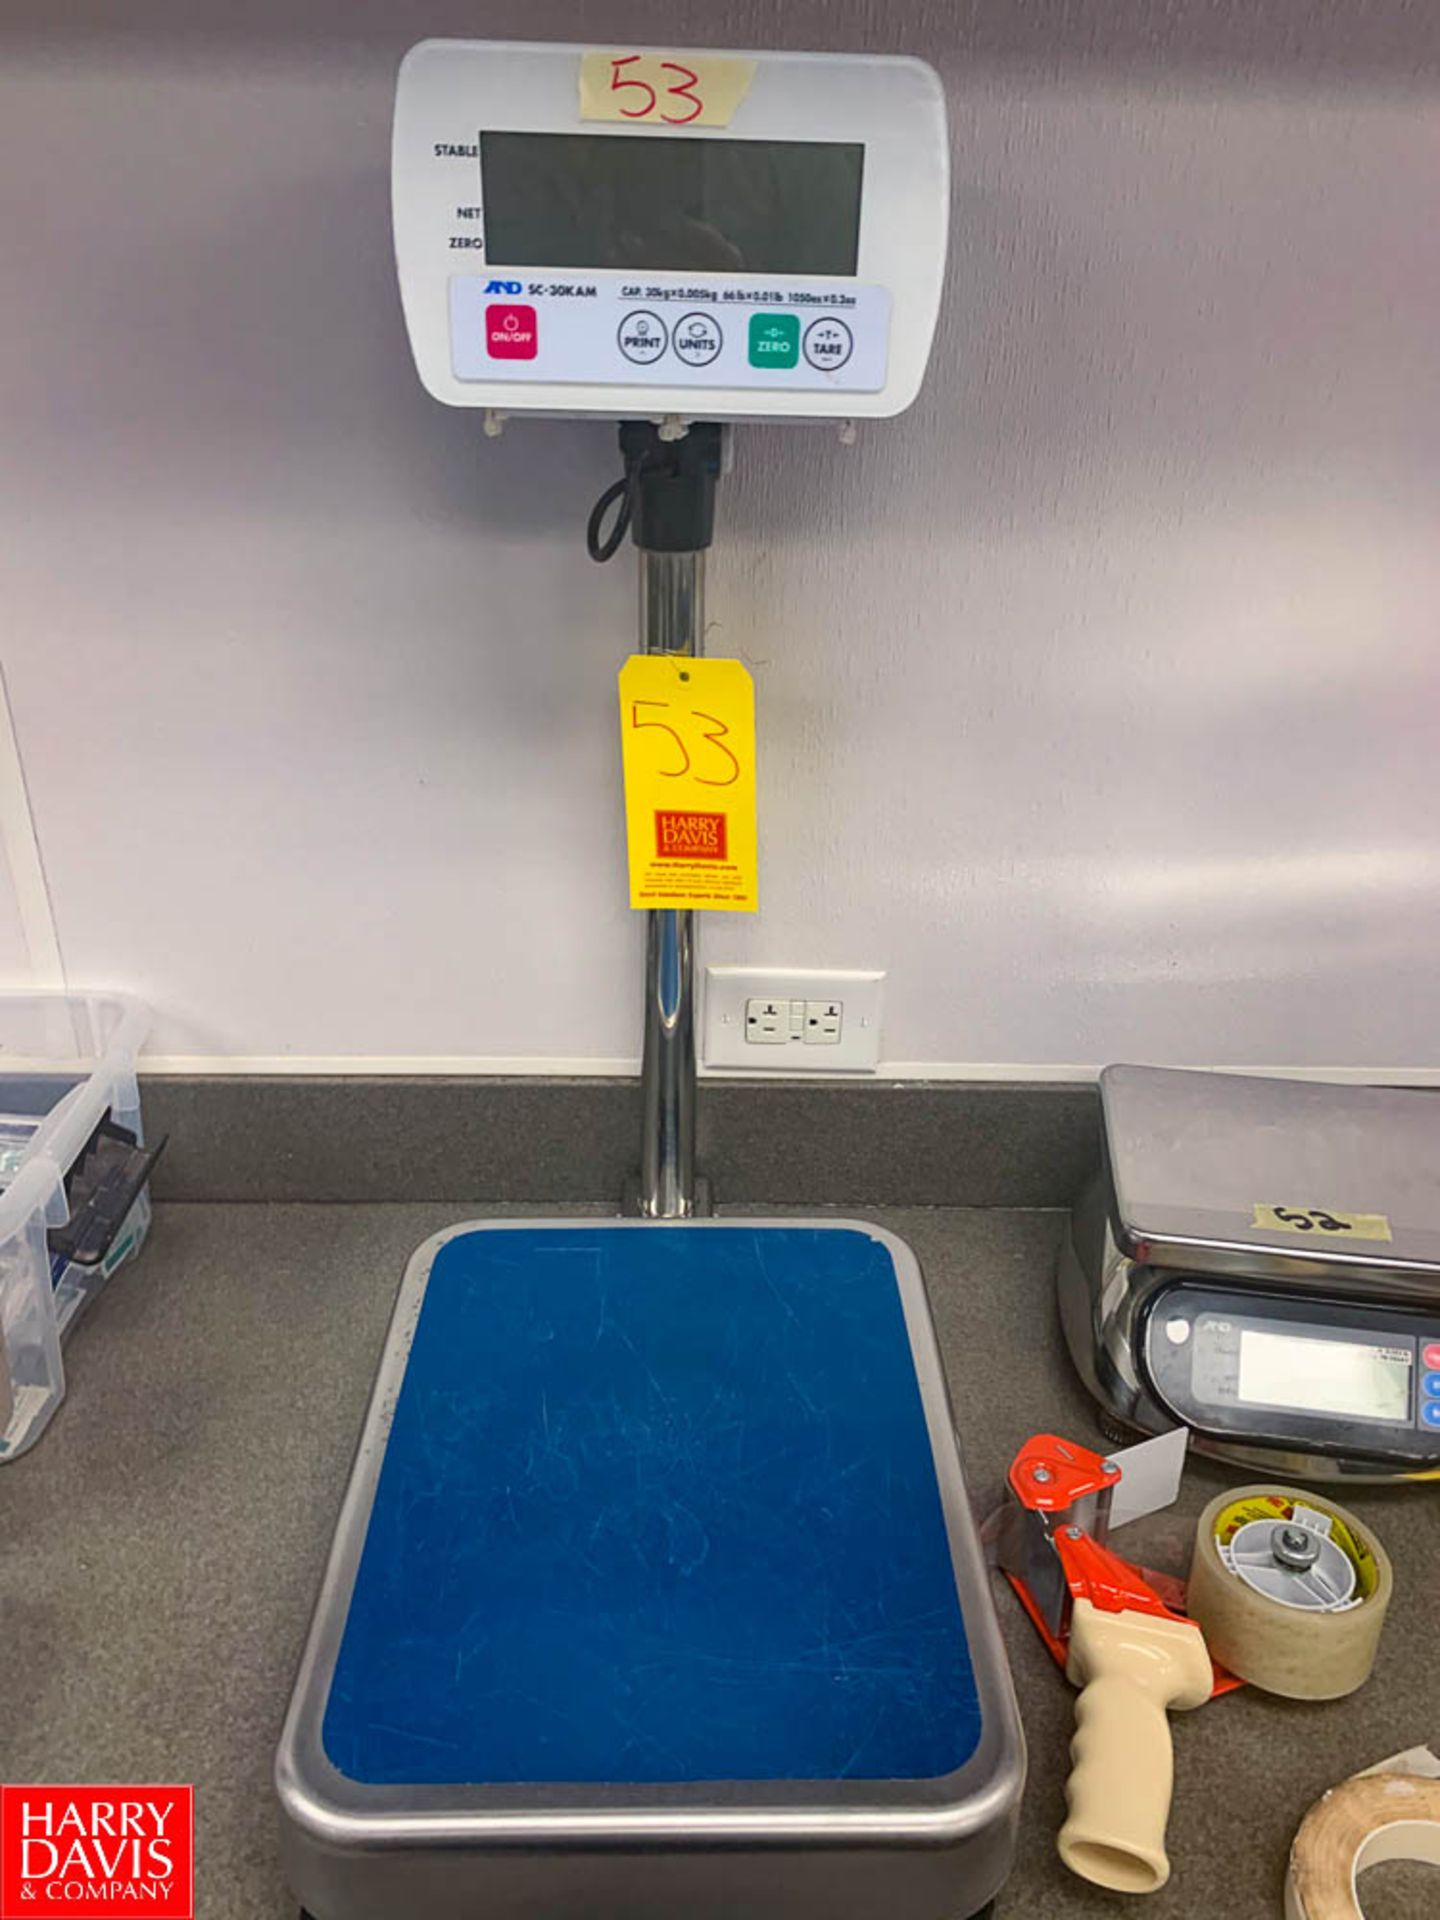 A&D Weighing, Model: SC-30KAM Washdown Checkweighing Scale Rigging: $25